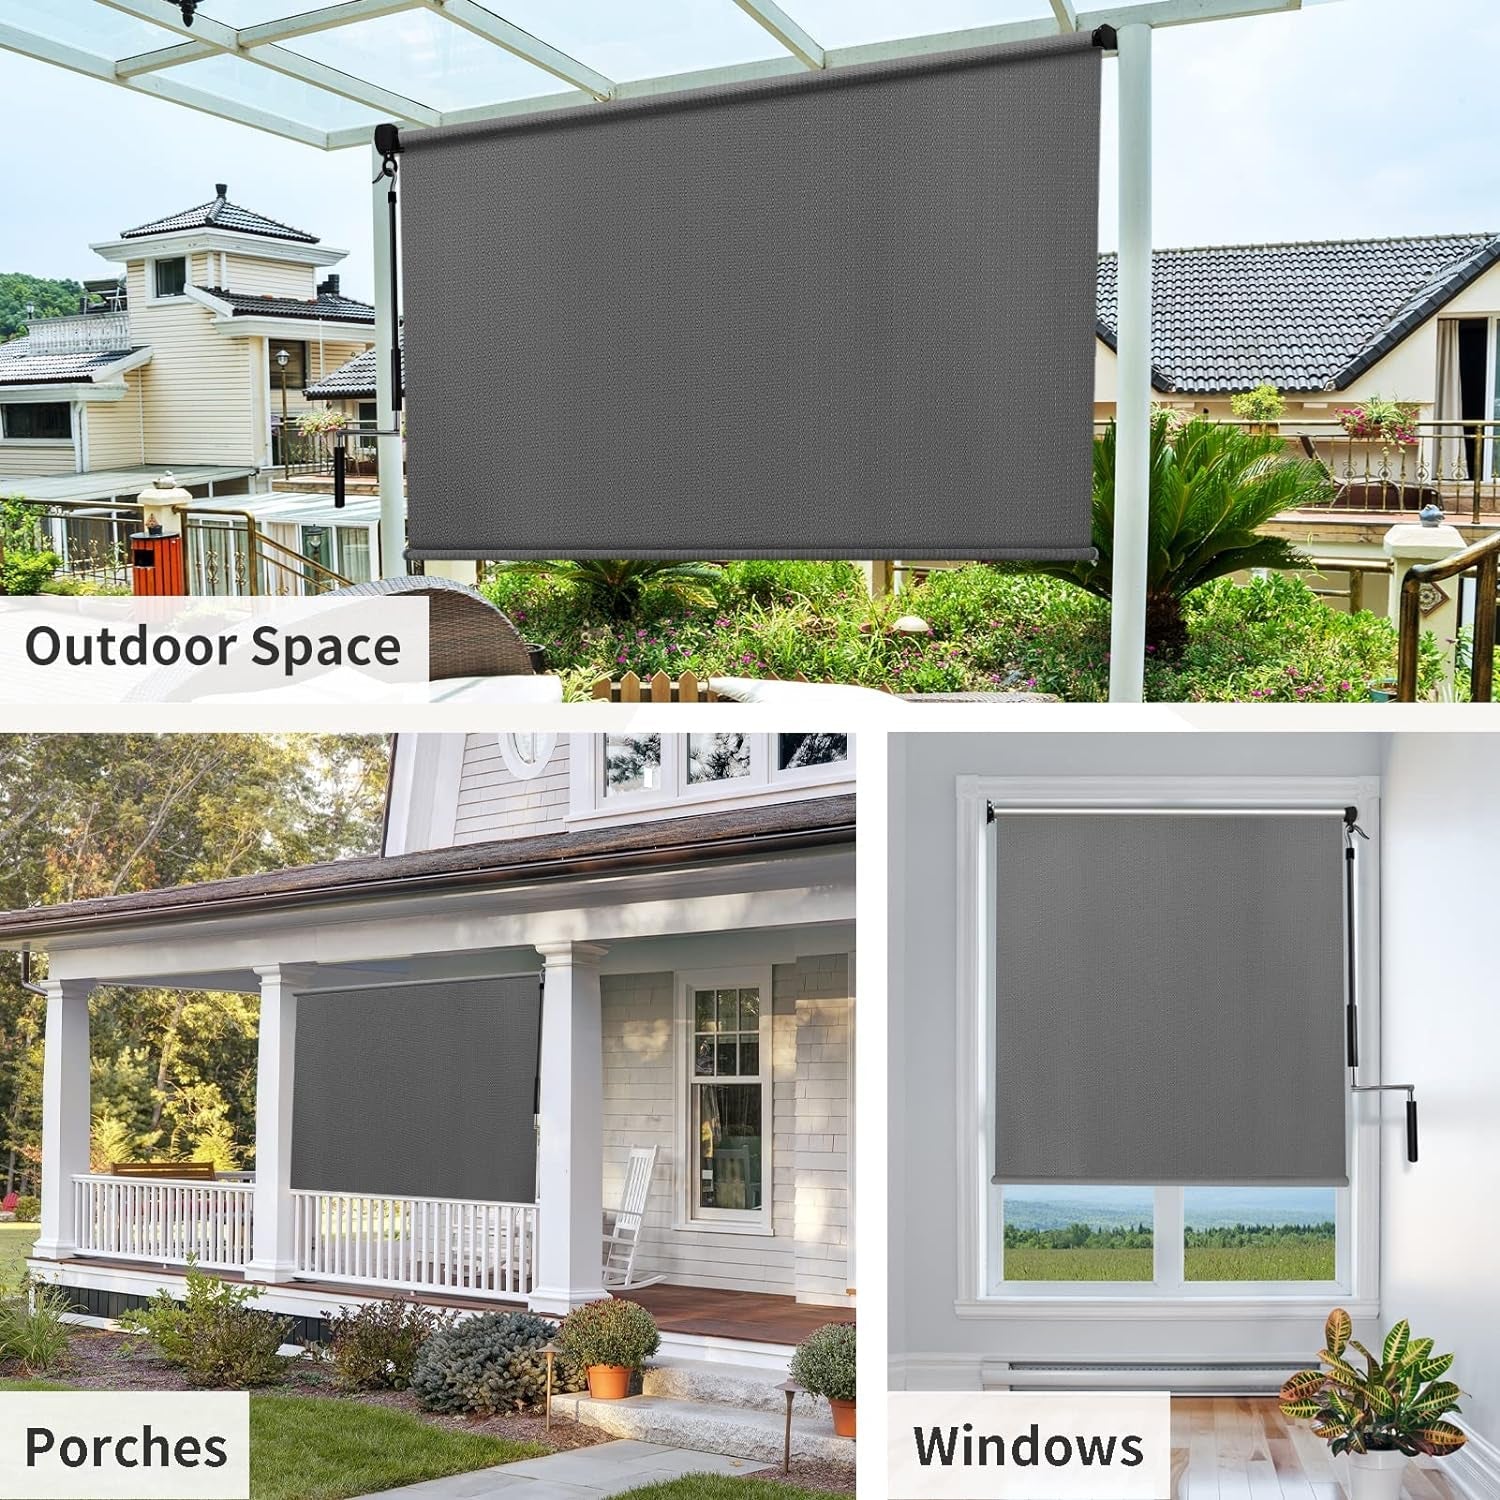 Amagenix Outdoor Roller Shades 6'(W) X 8'(H), Exterior Cordless Patio Shades Roll up Outdoor Blinds for Porch Gazebo, Gray